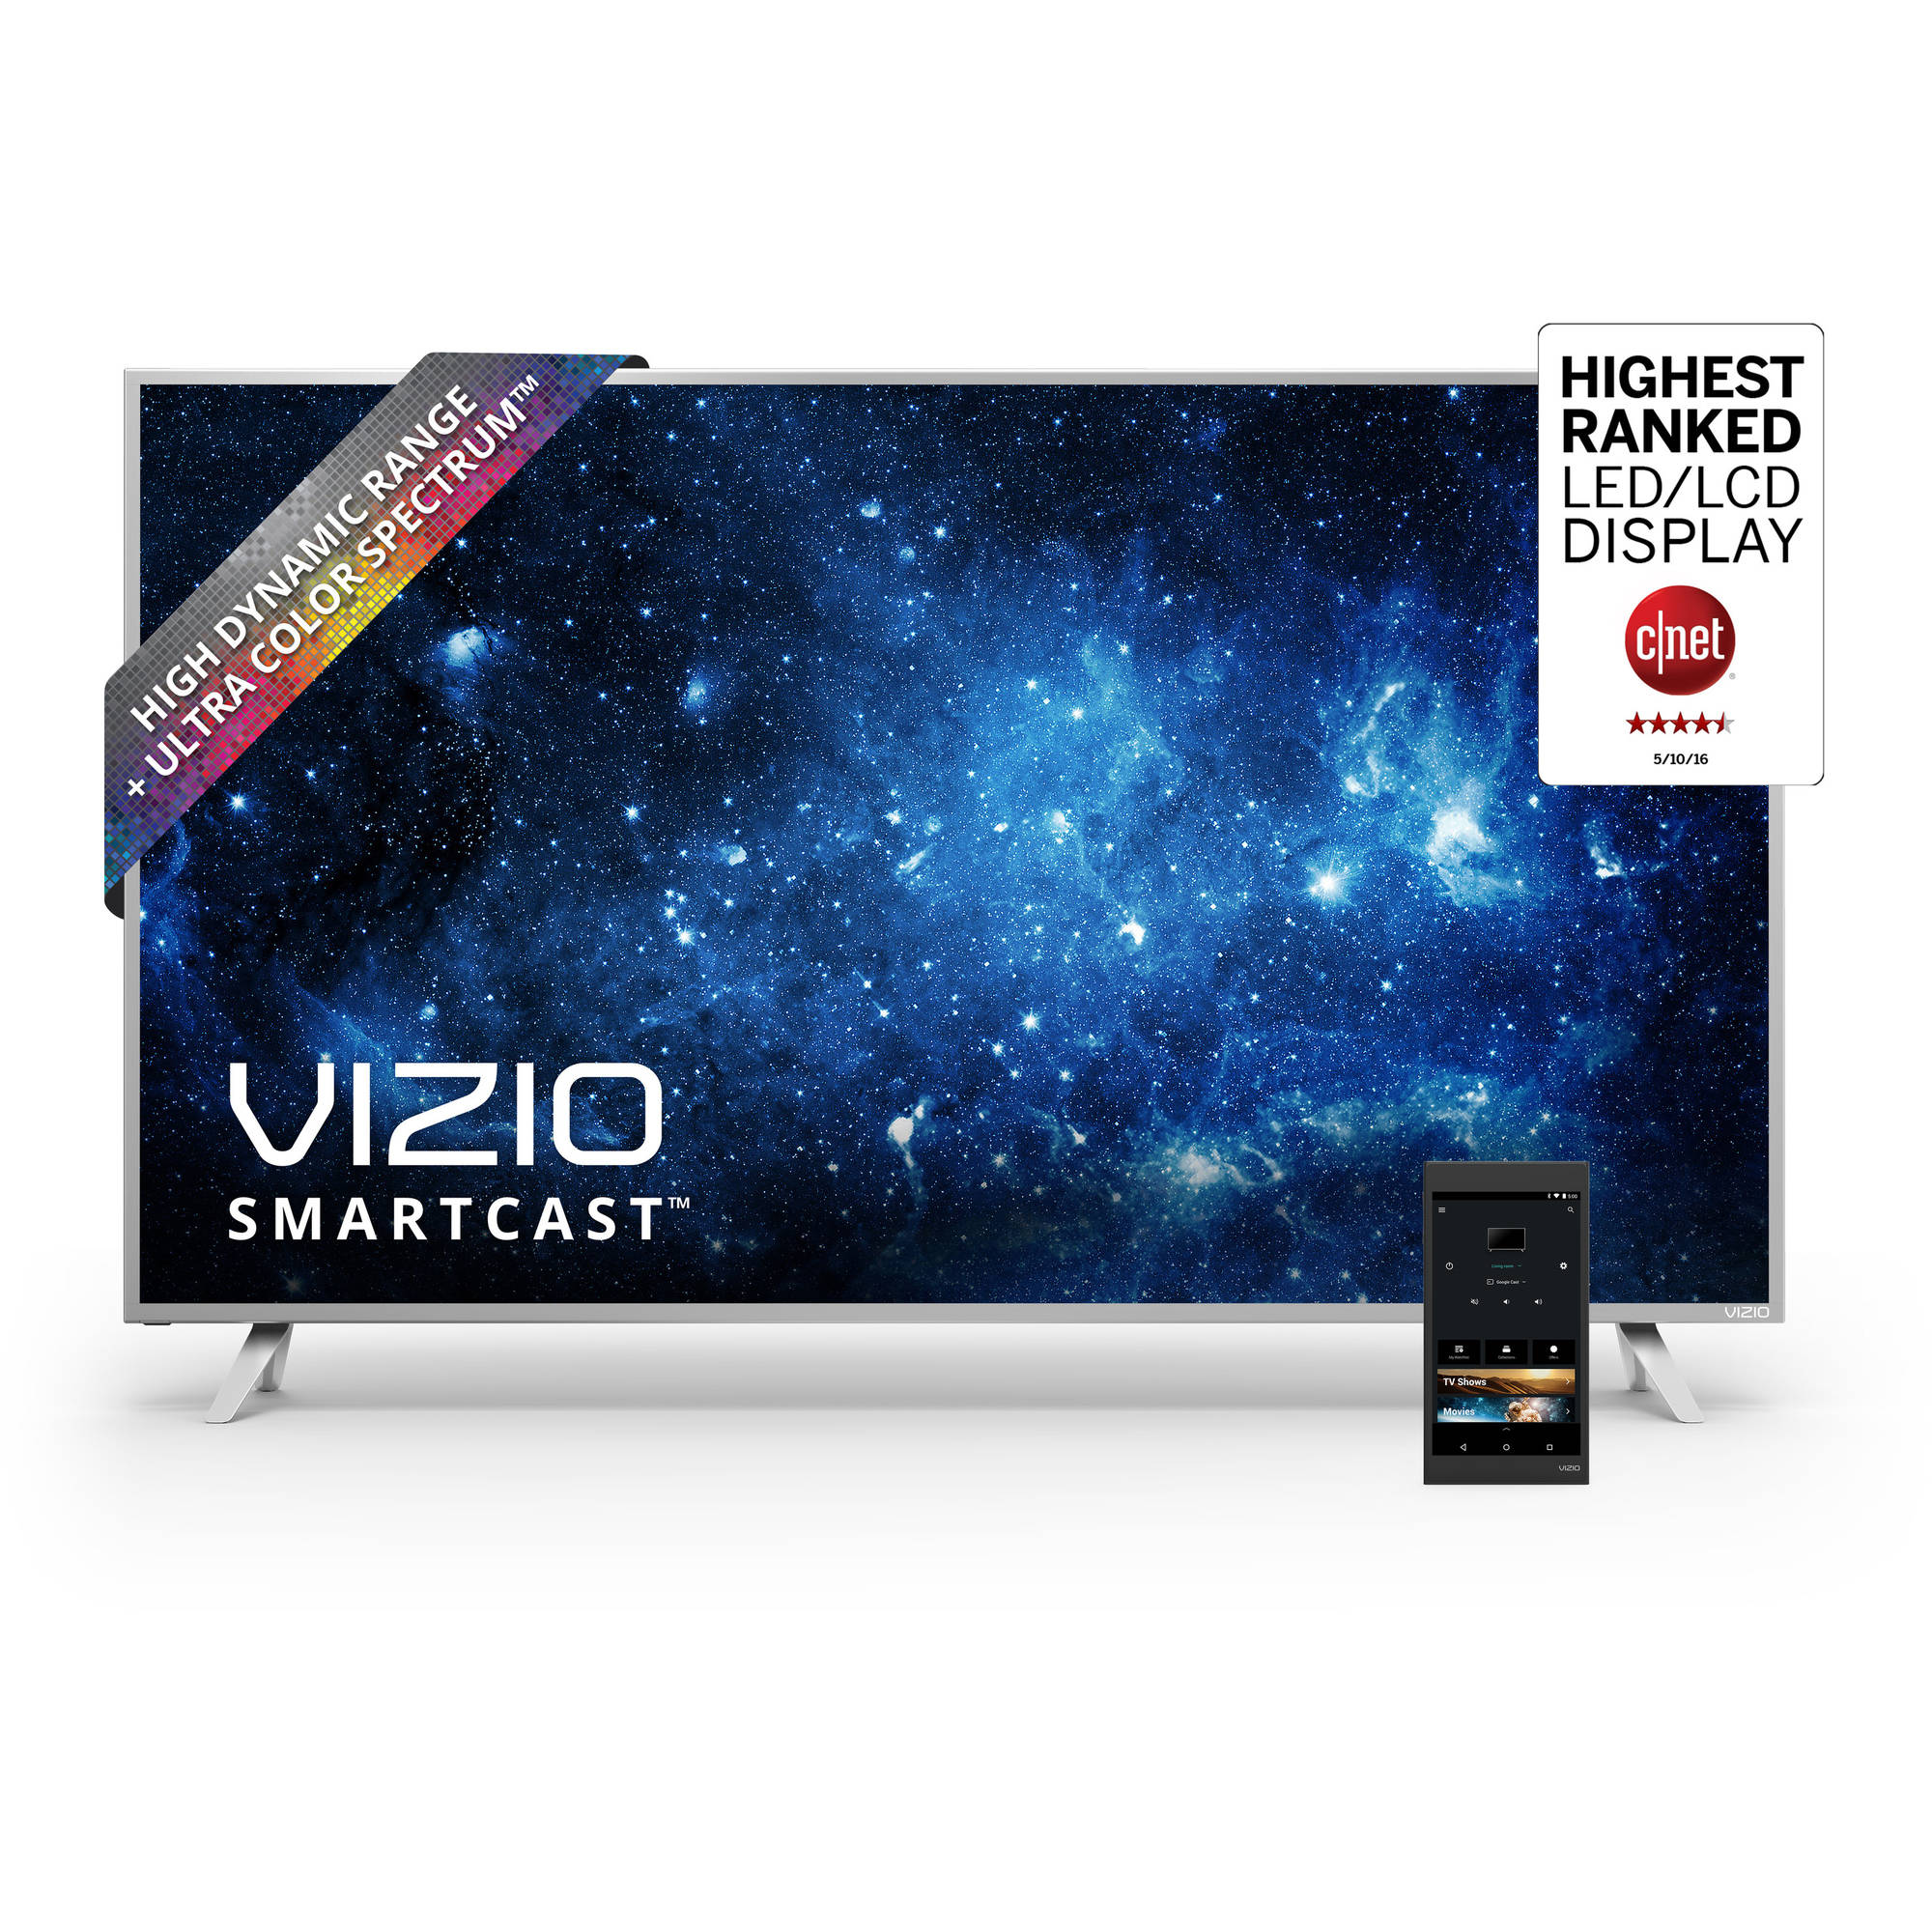 VIZIO SmartCast P-Series 75" Class (74.54" Diag.) 4K Ultra HD HDR 2160p 240Hz Full Array LED Smart Home Theater Display w/ Chromecast built-in (P75-C1) - image 2 of 17